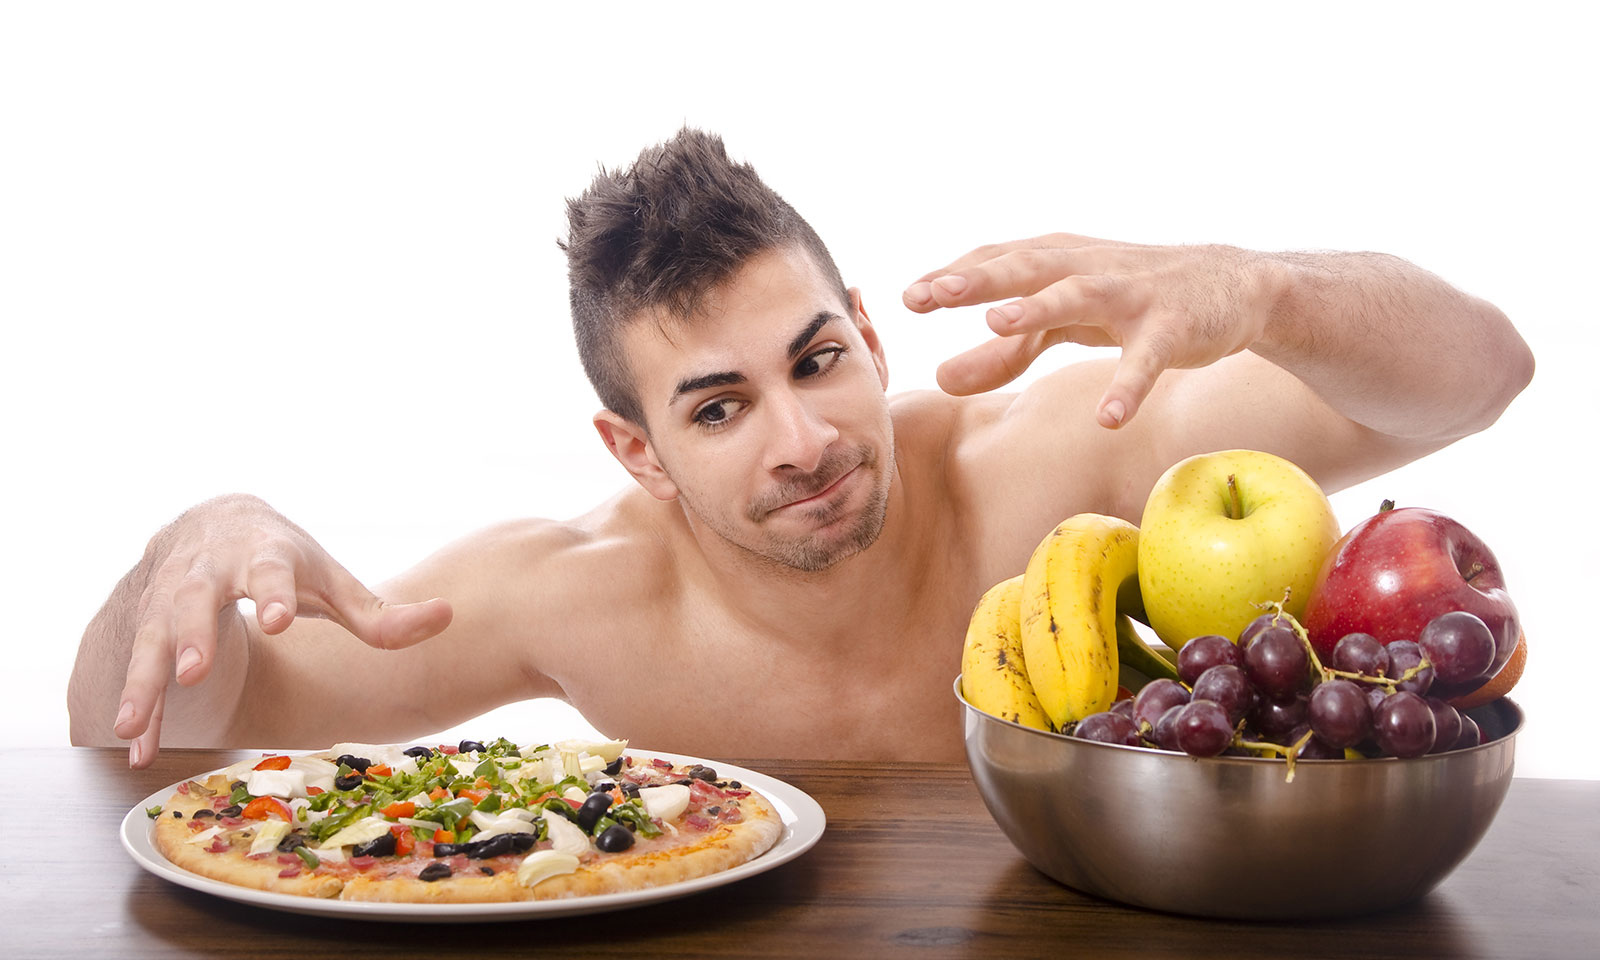 Four Of The Most Common Diet And Nutritional Mistakes